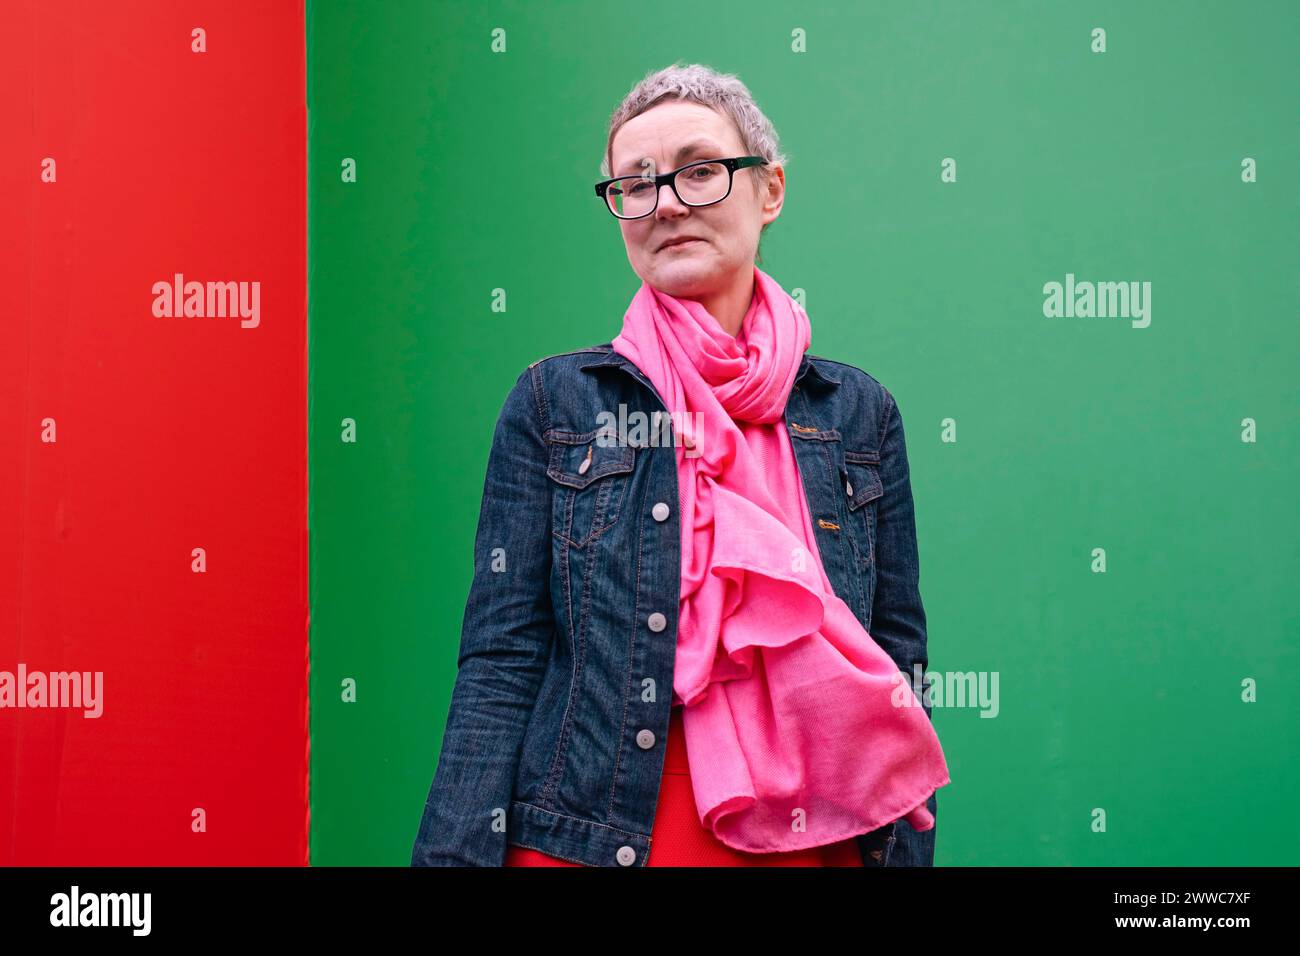 Mature woman wearing eyeglasses standing in front of green wall Stock Photo